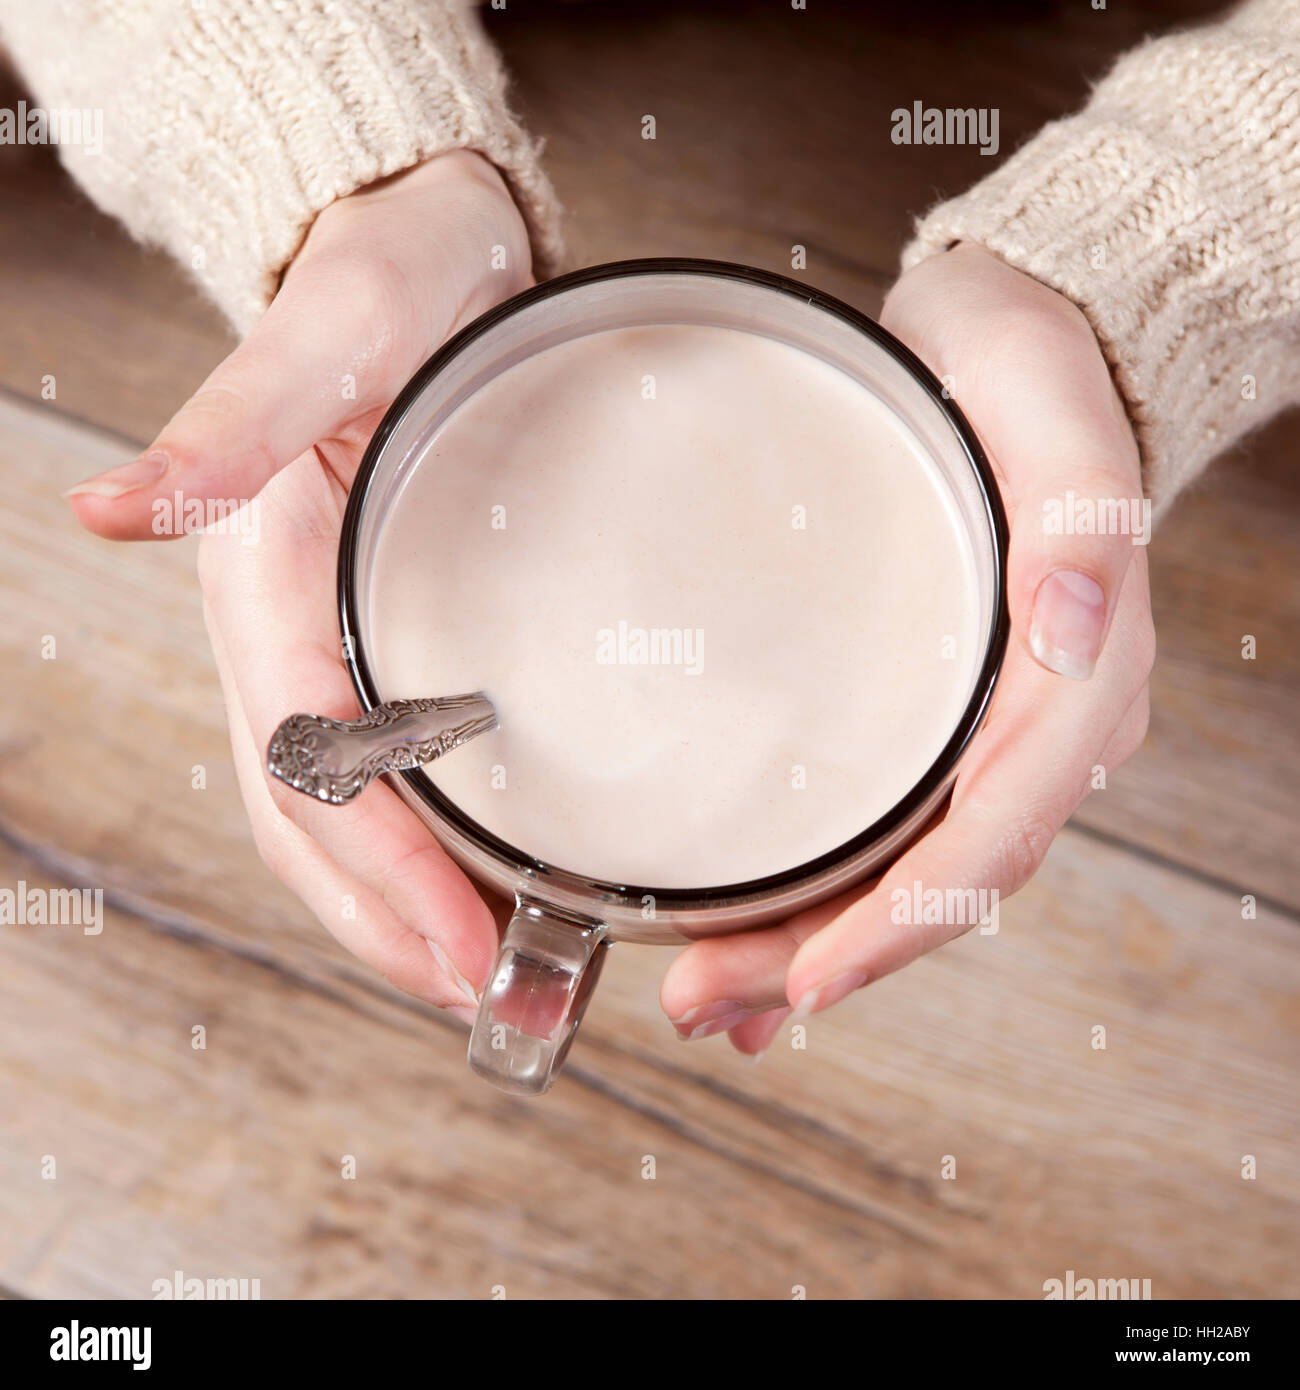 Hands in mittens hold cocoa. Face in unfocus Stock Photo